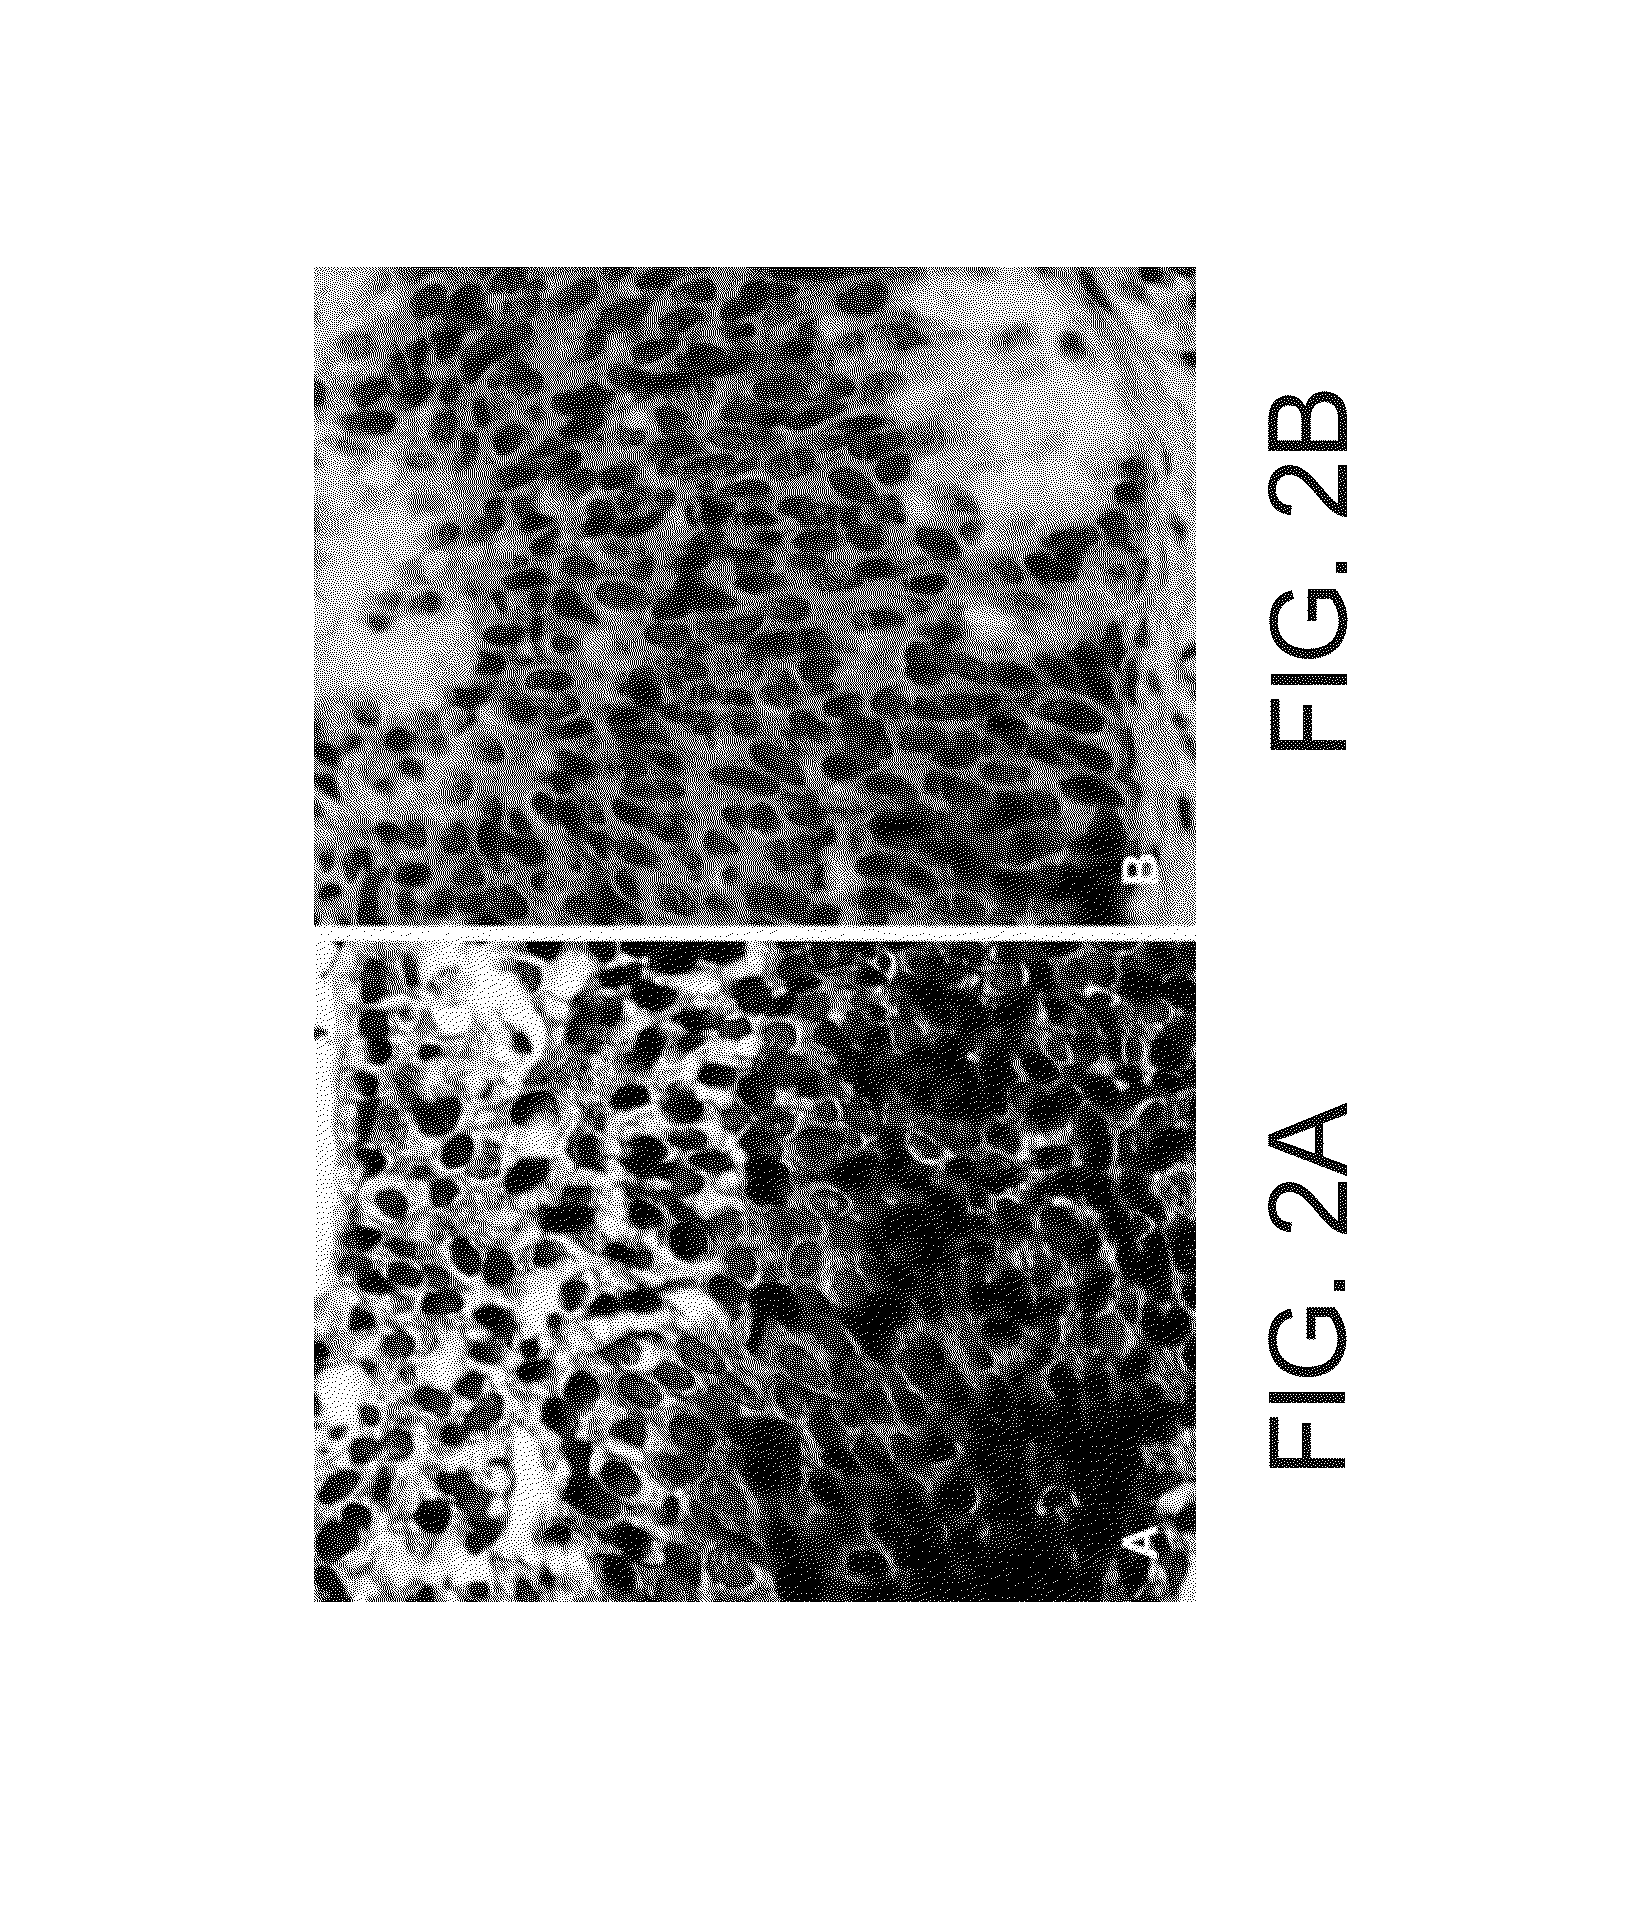 Kits for and methods of differential staining of cervical cancer cells and/or tissues